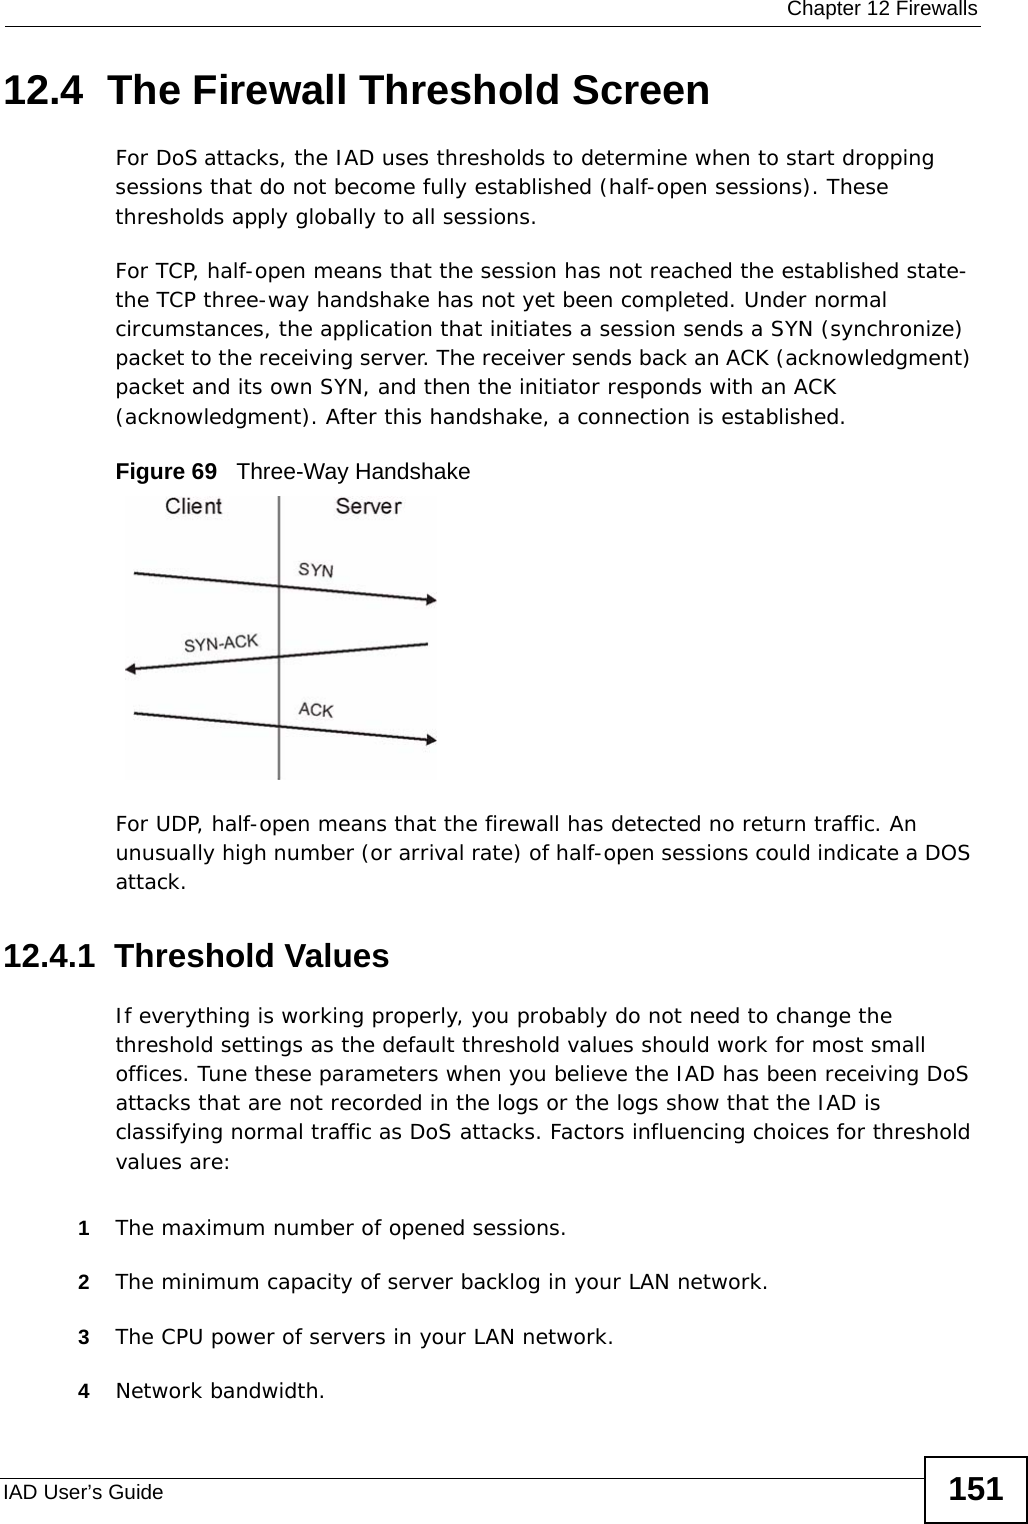  Chapter 12 FirewallsIAD User’s Guide 15112.4  The Firewall Threshold ScreenFor DoS attacks, the IAD uses thresholds to determine when to start dropping sessions that do not become fully established (half-open sessions). These thresholds apply globally to all sessions.For TCP, half-open means that the session has not reached the established state-the TCP three-way handshake has not yet been completed. Under normal circumstances, the application that initiates a session sends a SYN (synchronize) packet to the receiving server. The receiver sends back an ACK (acknowledgment) packet and its own SYN, and then the initiator responds with an ACK (acknowledgment). After this handshake, a connection is established. Figure 69   Three-Way HandshakeFor UDP, half-open means that the firewall has detected no return traffic. An unusually high number (or arrival rate) of half-open sessions could indicate a DOS attack. 12.4.1  Threshold ValuesIf everything is working properly, you probably do not need to change the threshold settings as the default threshold values should work for most small offices. Tune these parameters when you believe the IAD has been receiving DoS attacks that are not recorded in the logs or the logs show that the IAD is classifying normal traffic as DoS attacks. Factors influencing choices for threshold values are:1The maximum number of opened sessions.2The minimum capacity of server backlog in your LAN network.3The CPU power of servers in your LAN network.4Network bandwidth. 